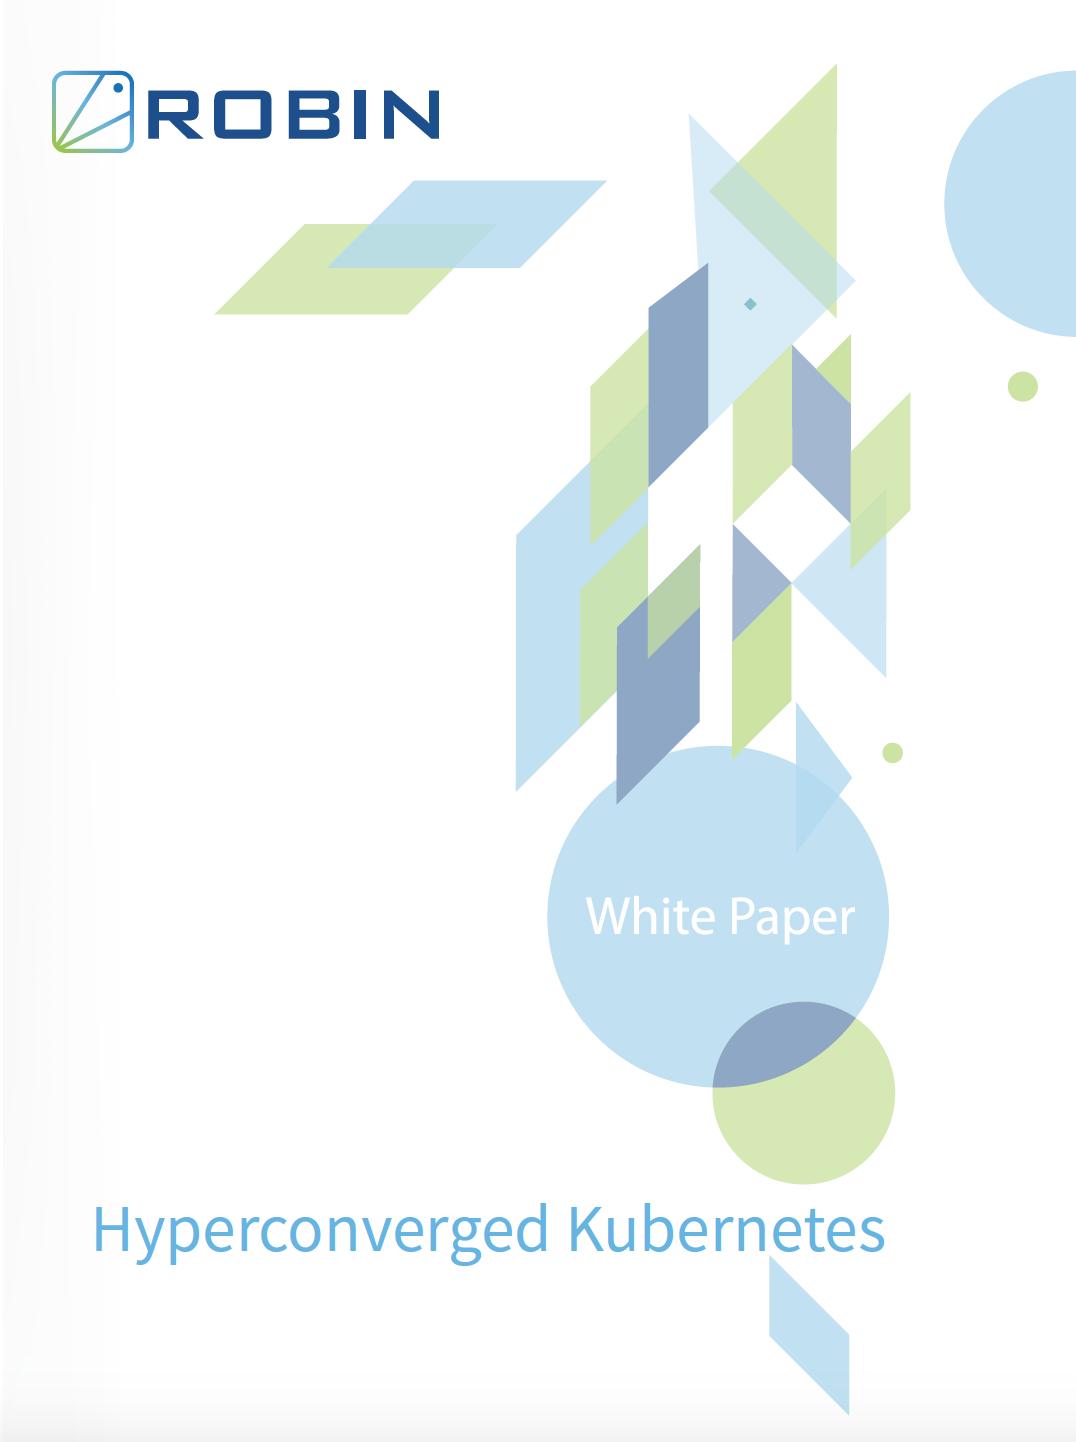 hyperconverged-kubernetes-white-paper-landing-page-graphic